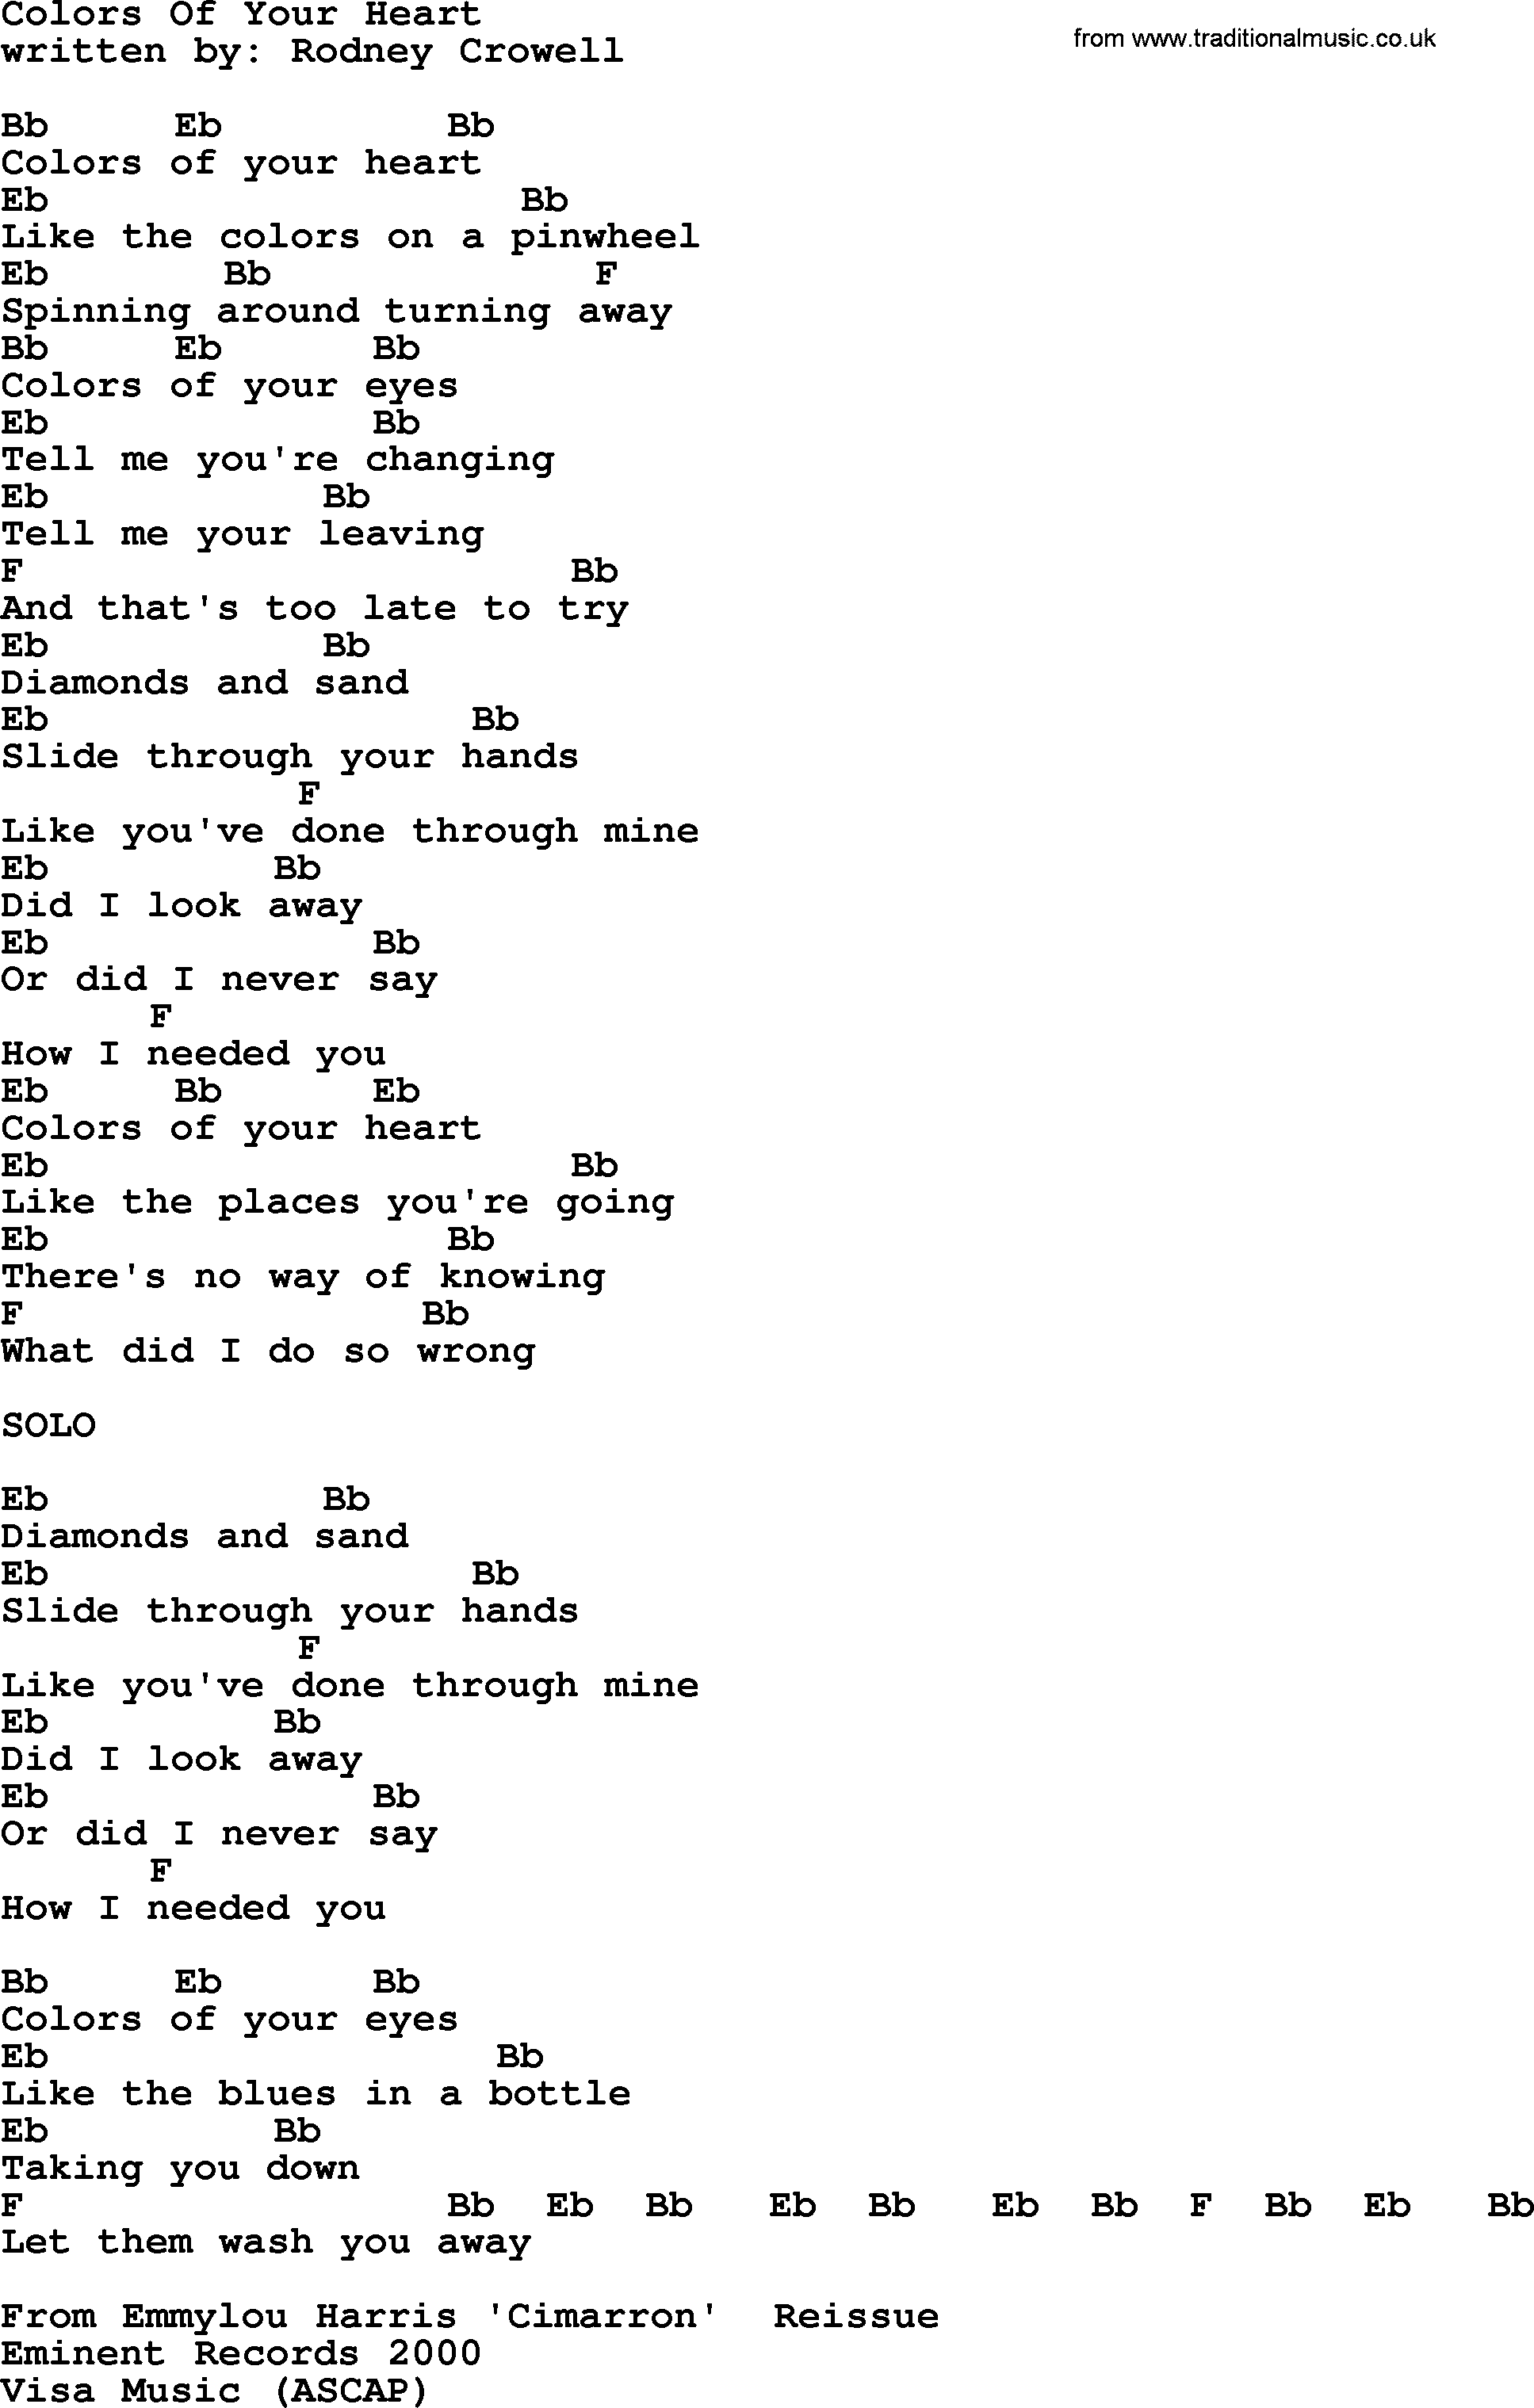 Emmylou Harris song: Colors Of Your Heart lyrics and chords